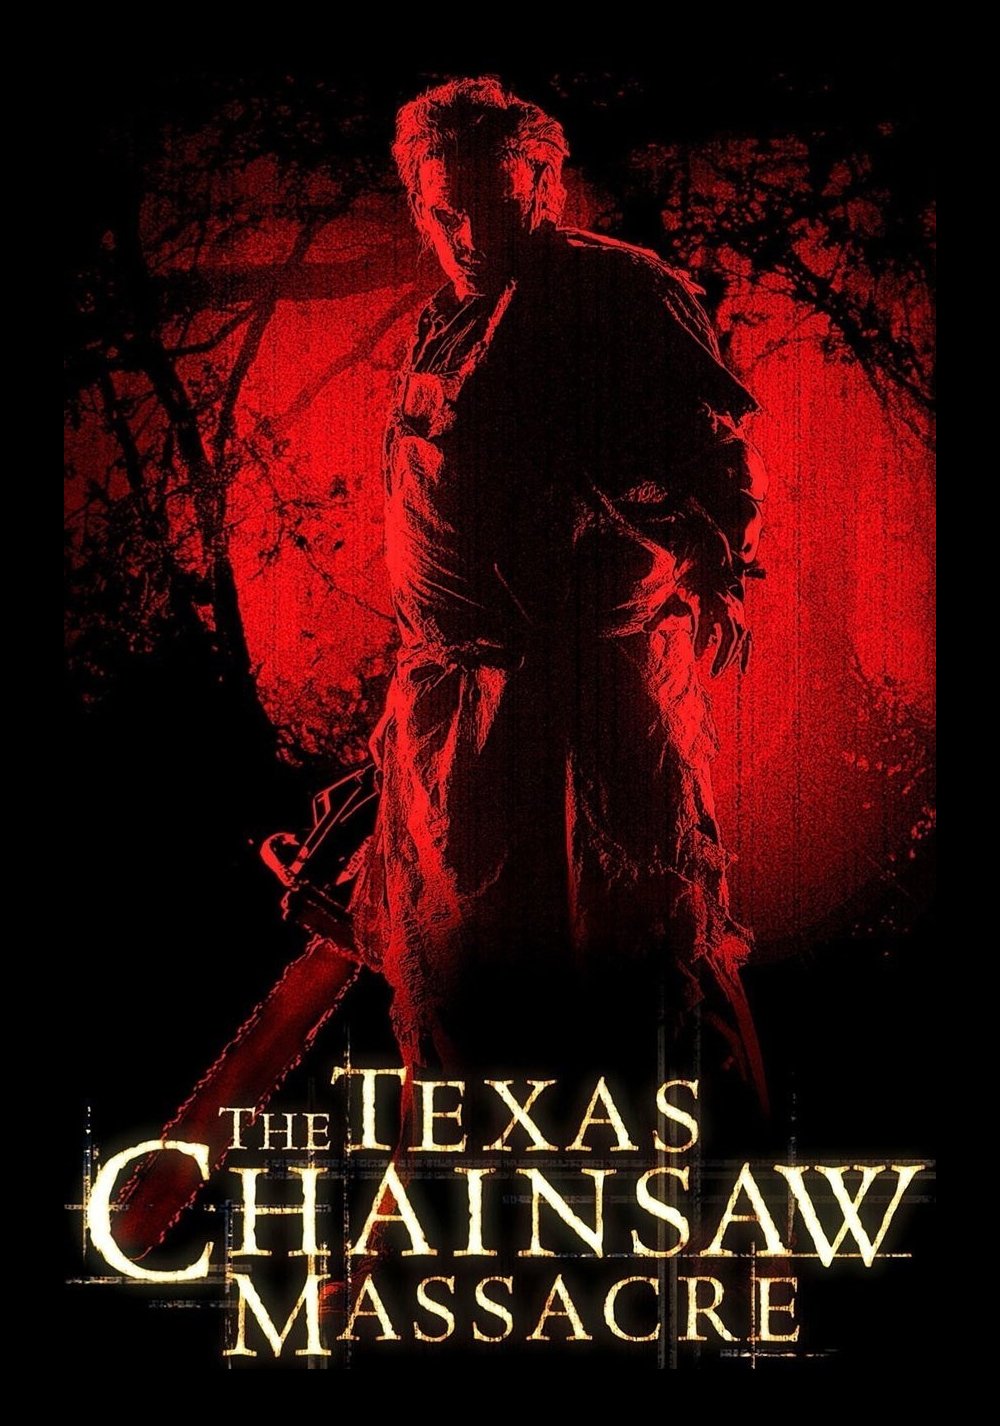 The Texas Chainsaw Massacre (2003) Movie Poster - ID: 139593 - Image Abyss